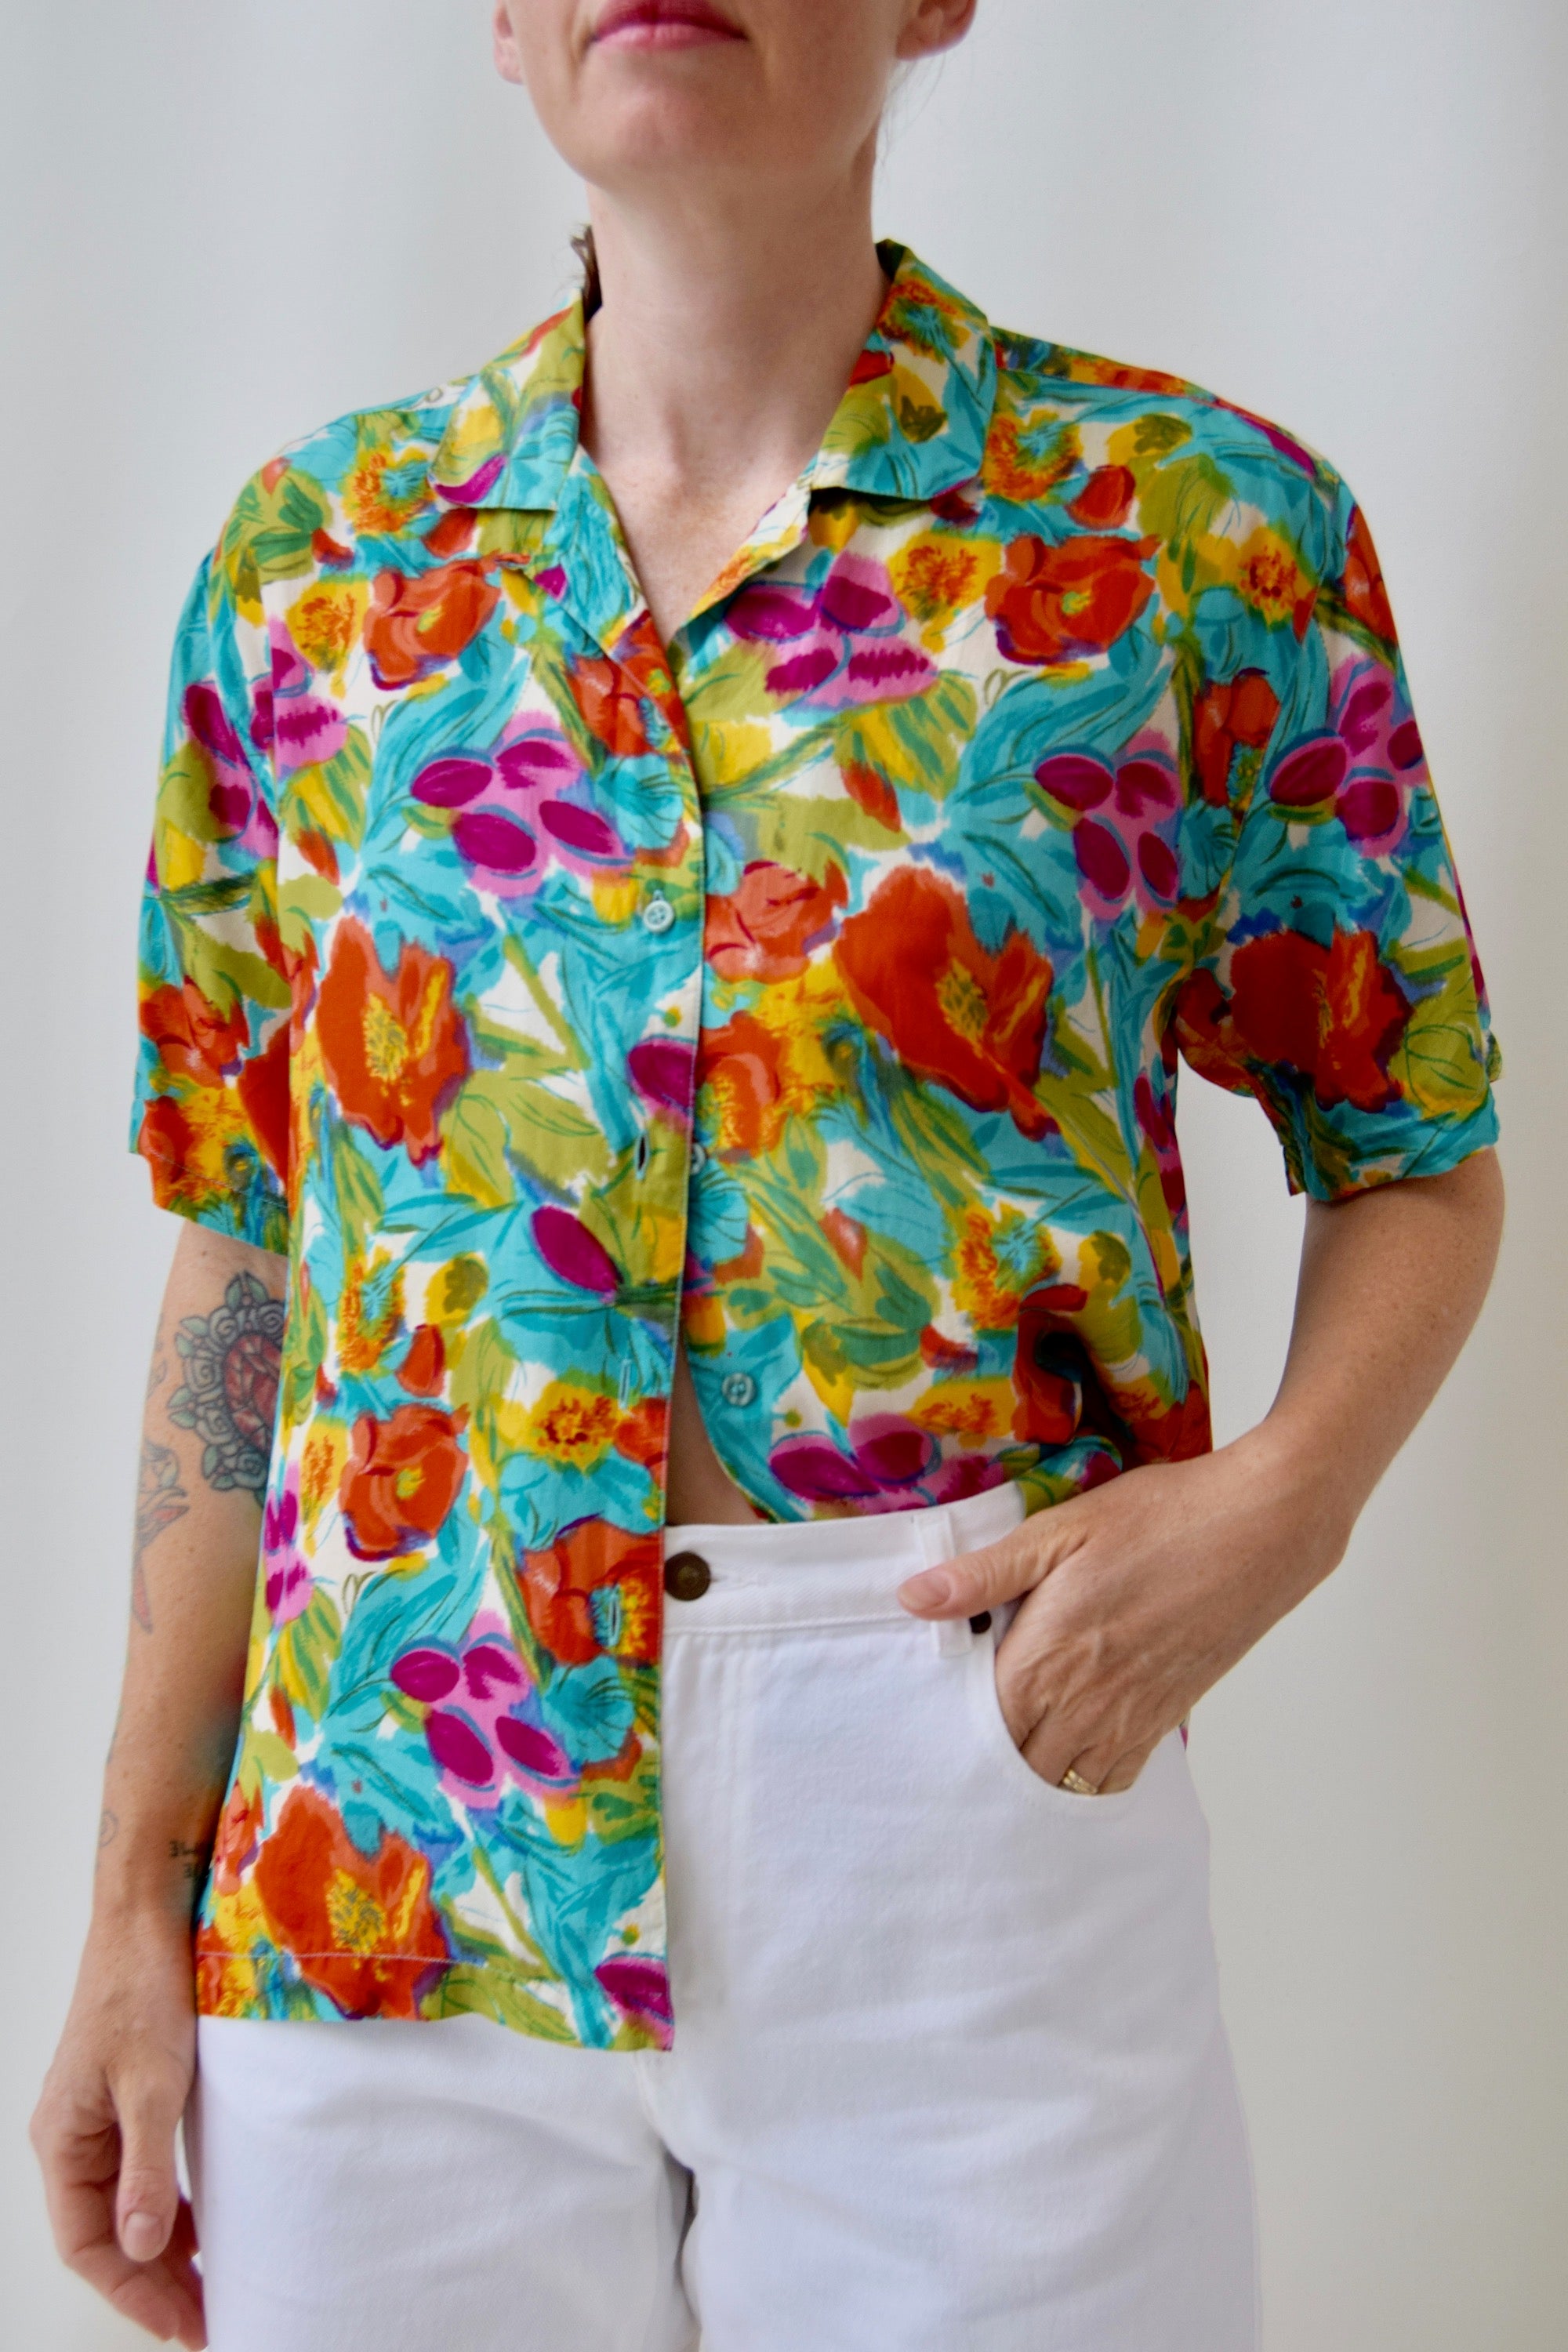 Rainbow Floral Button Up